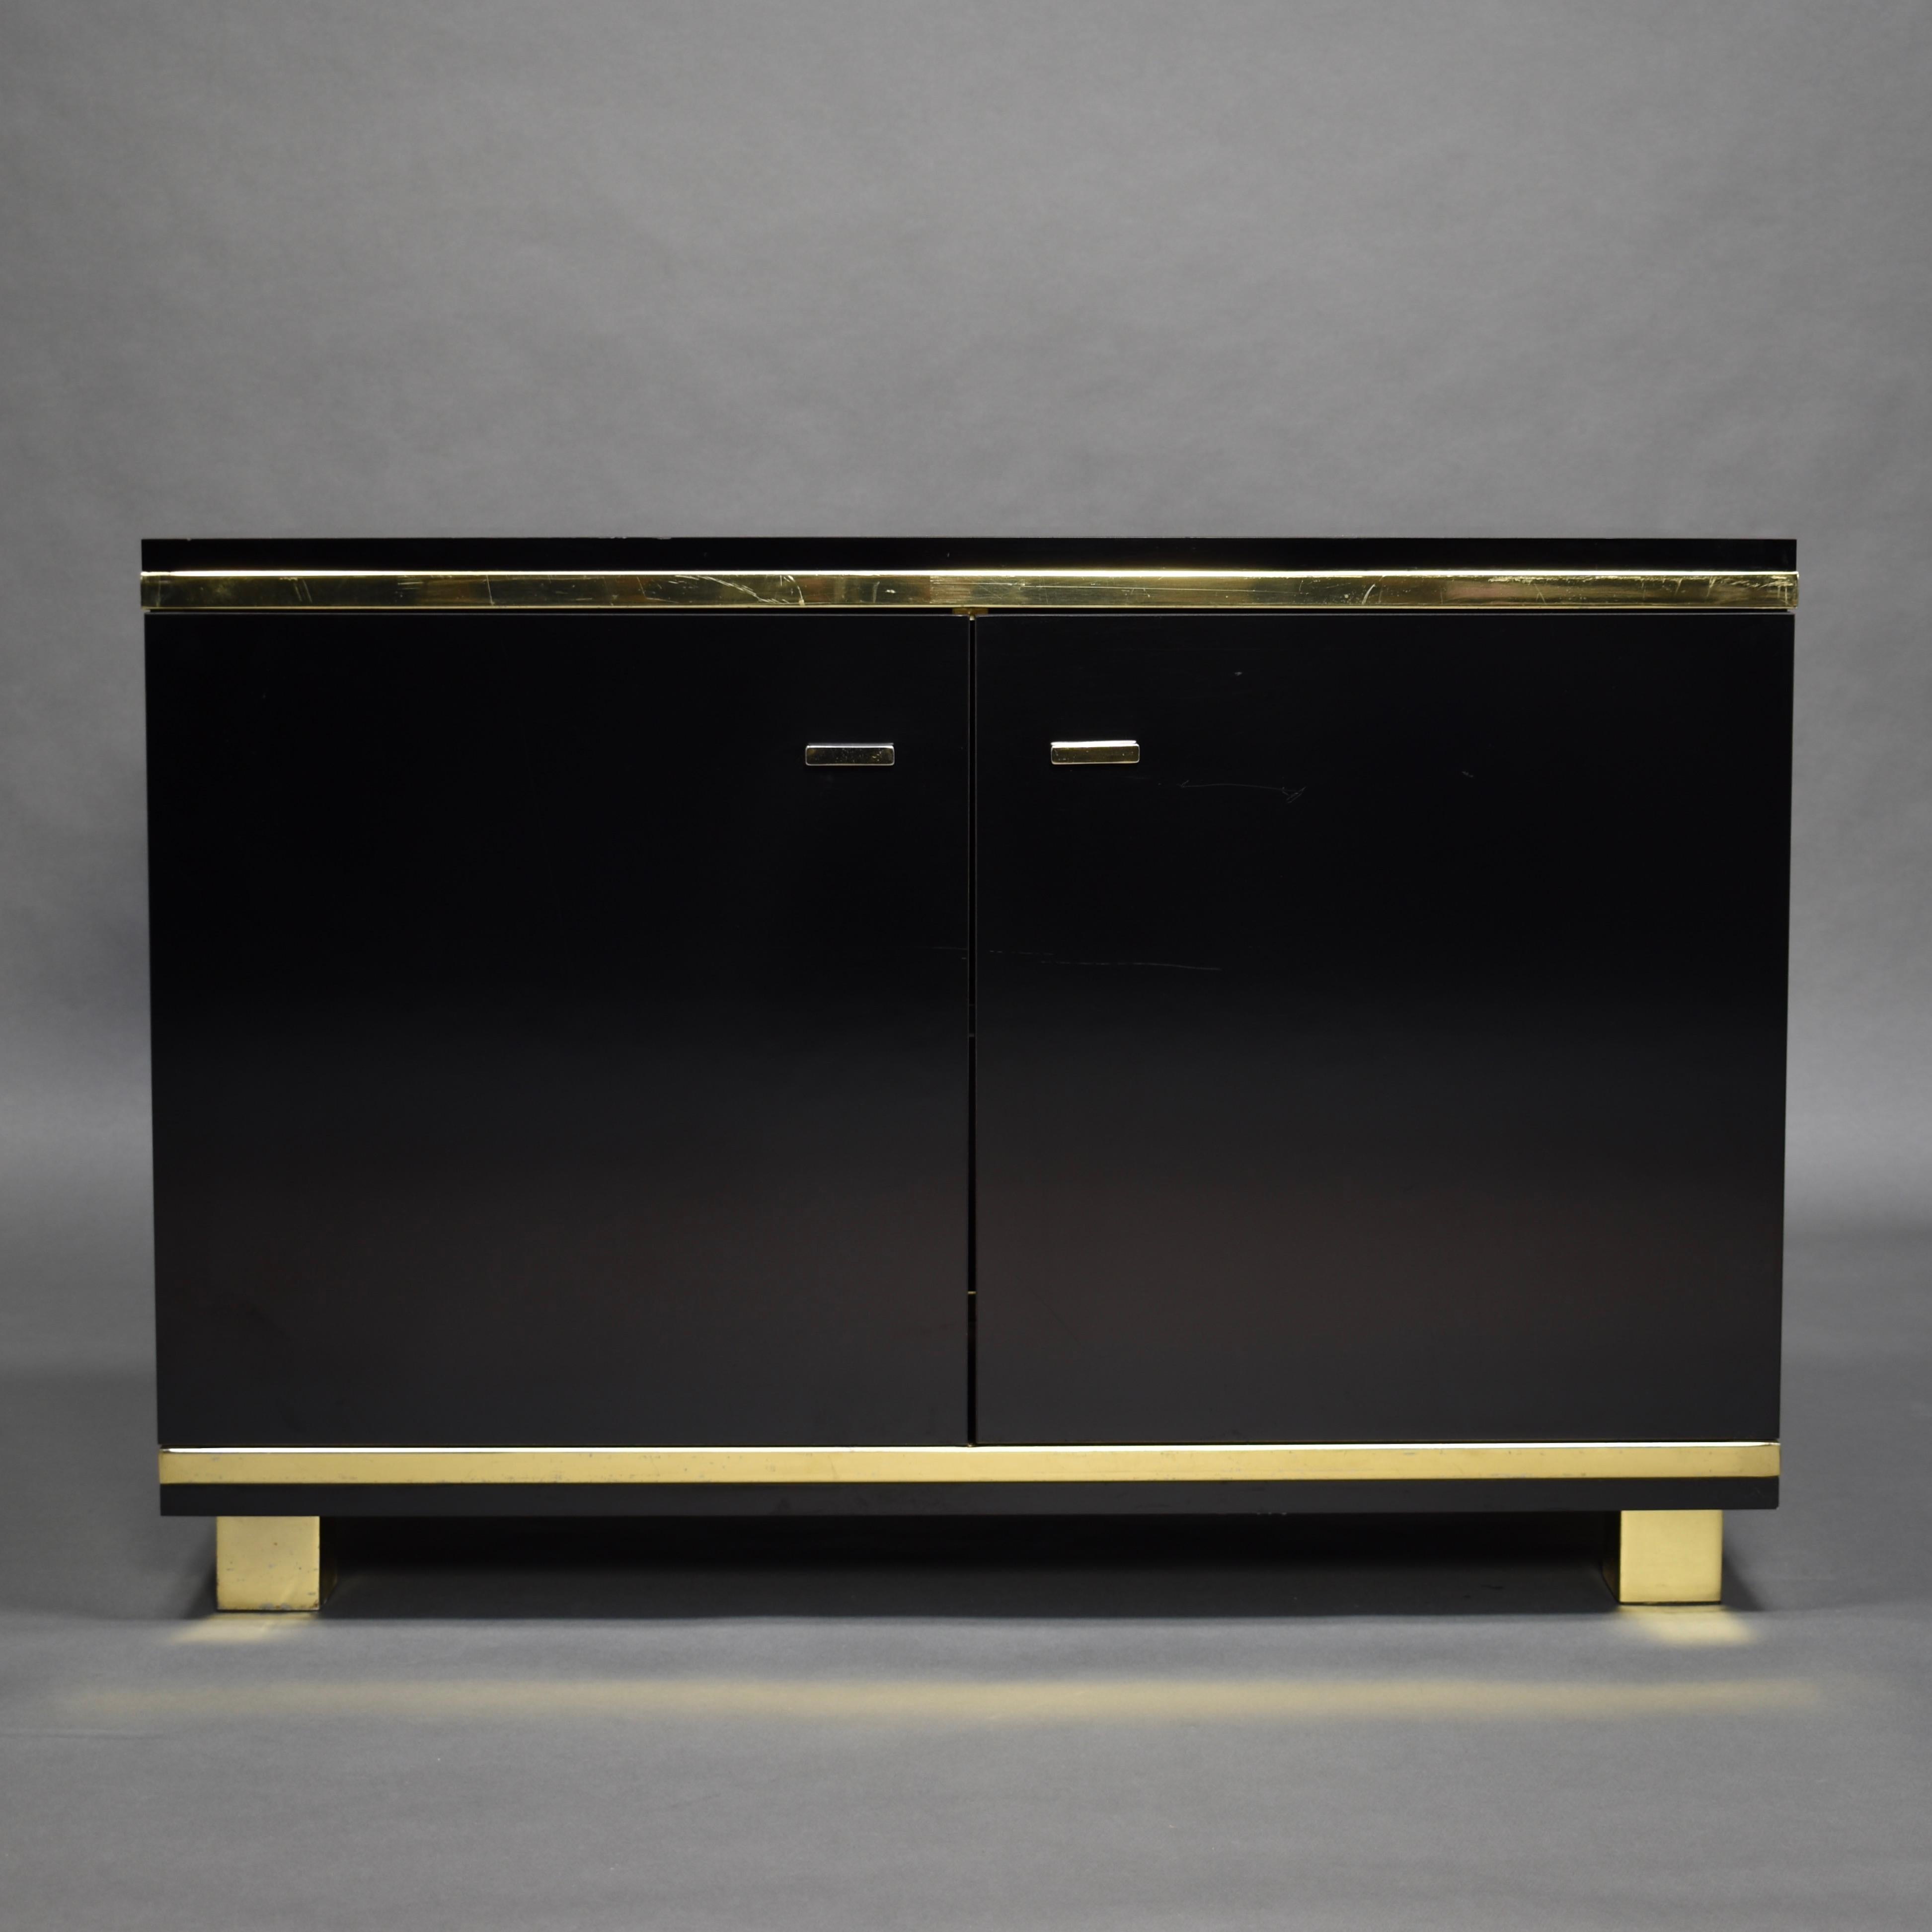 Willy Rizzo style credenza in black melamine and brass details, circa 1970.

Designer: in the style of Willy Rizzo

Manufacturer: Unknown

Country: Italy

Model: credenza / sideboard

Material: melamine, brass

Period: circa 1970

Size